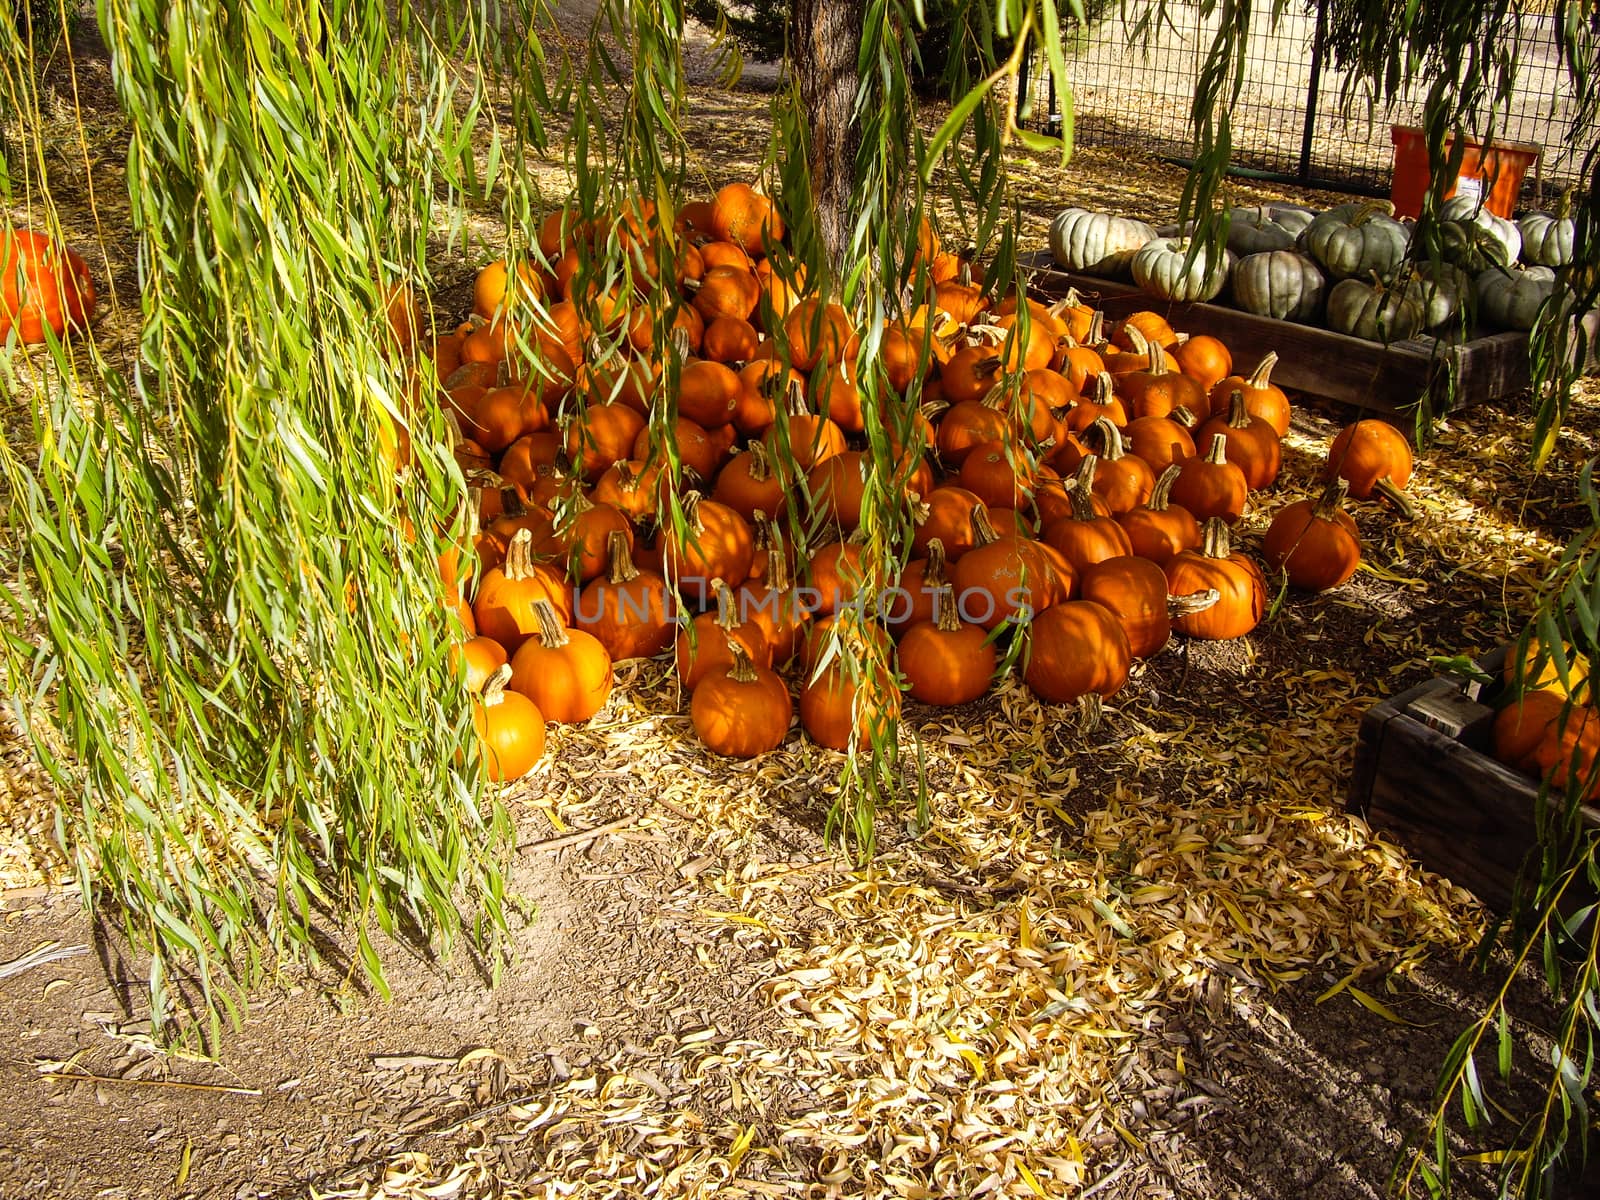 Pumpkins curing in shade at harvest time